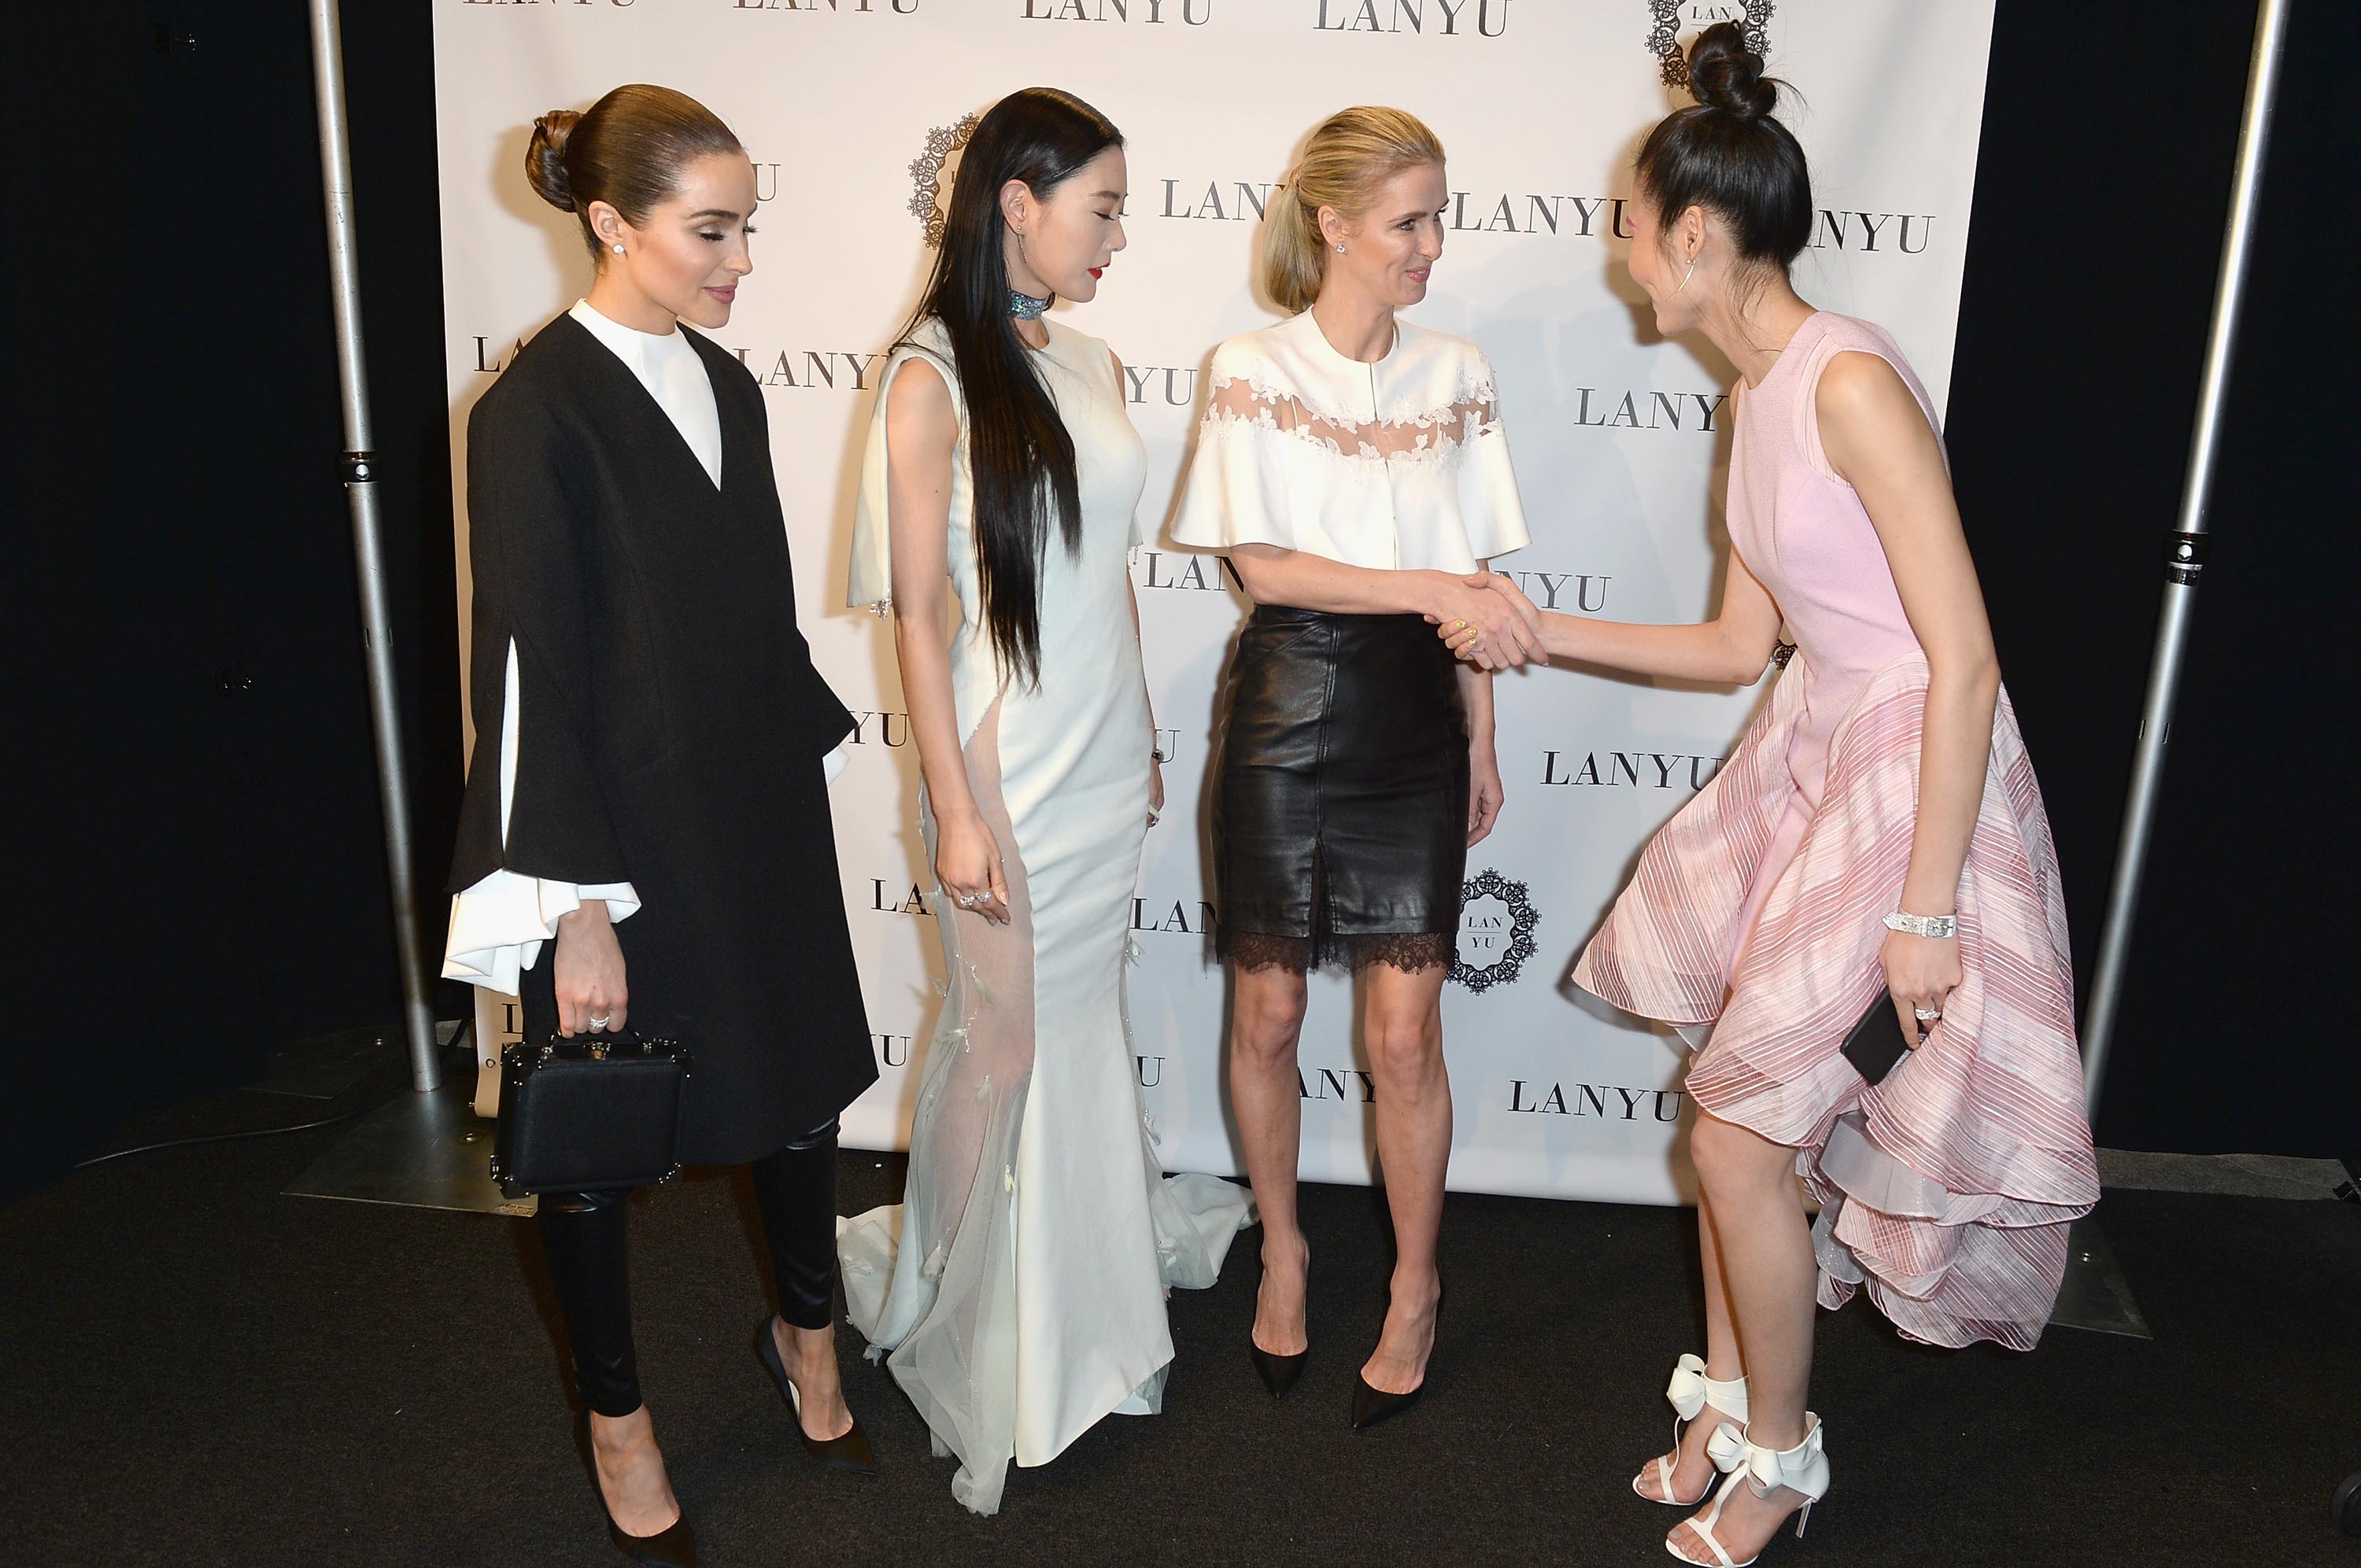 Nicky Hilton Rothschild attends the Lanyu collection Front Row